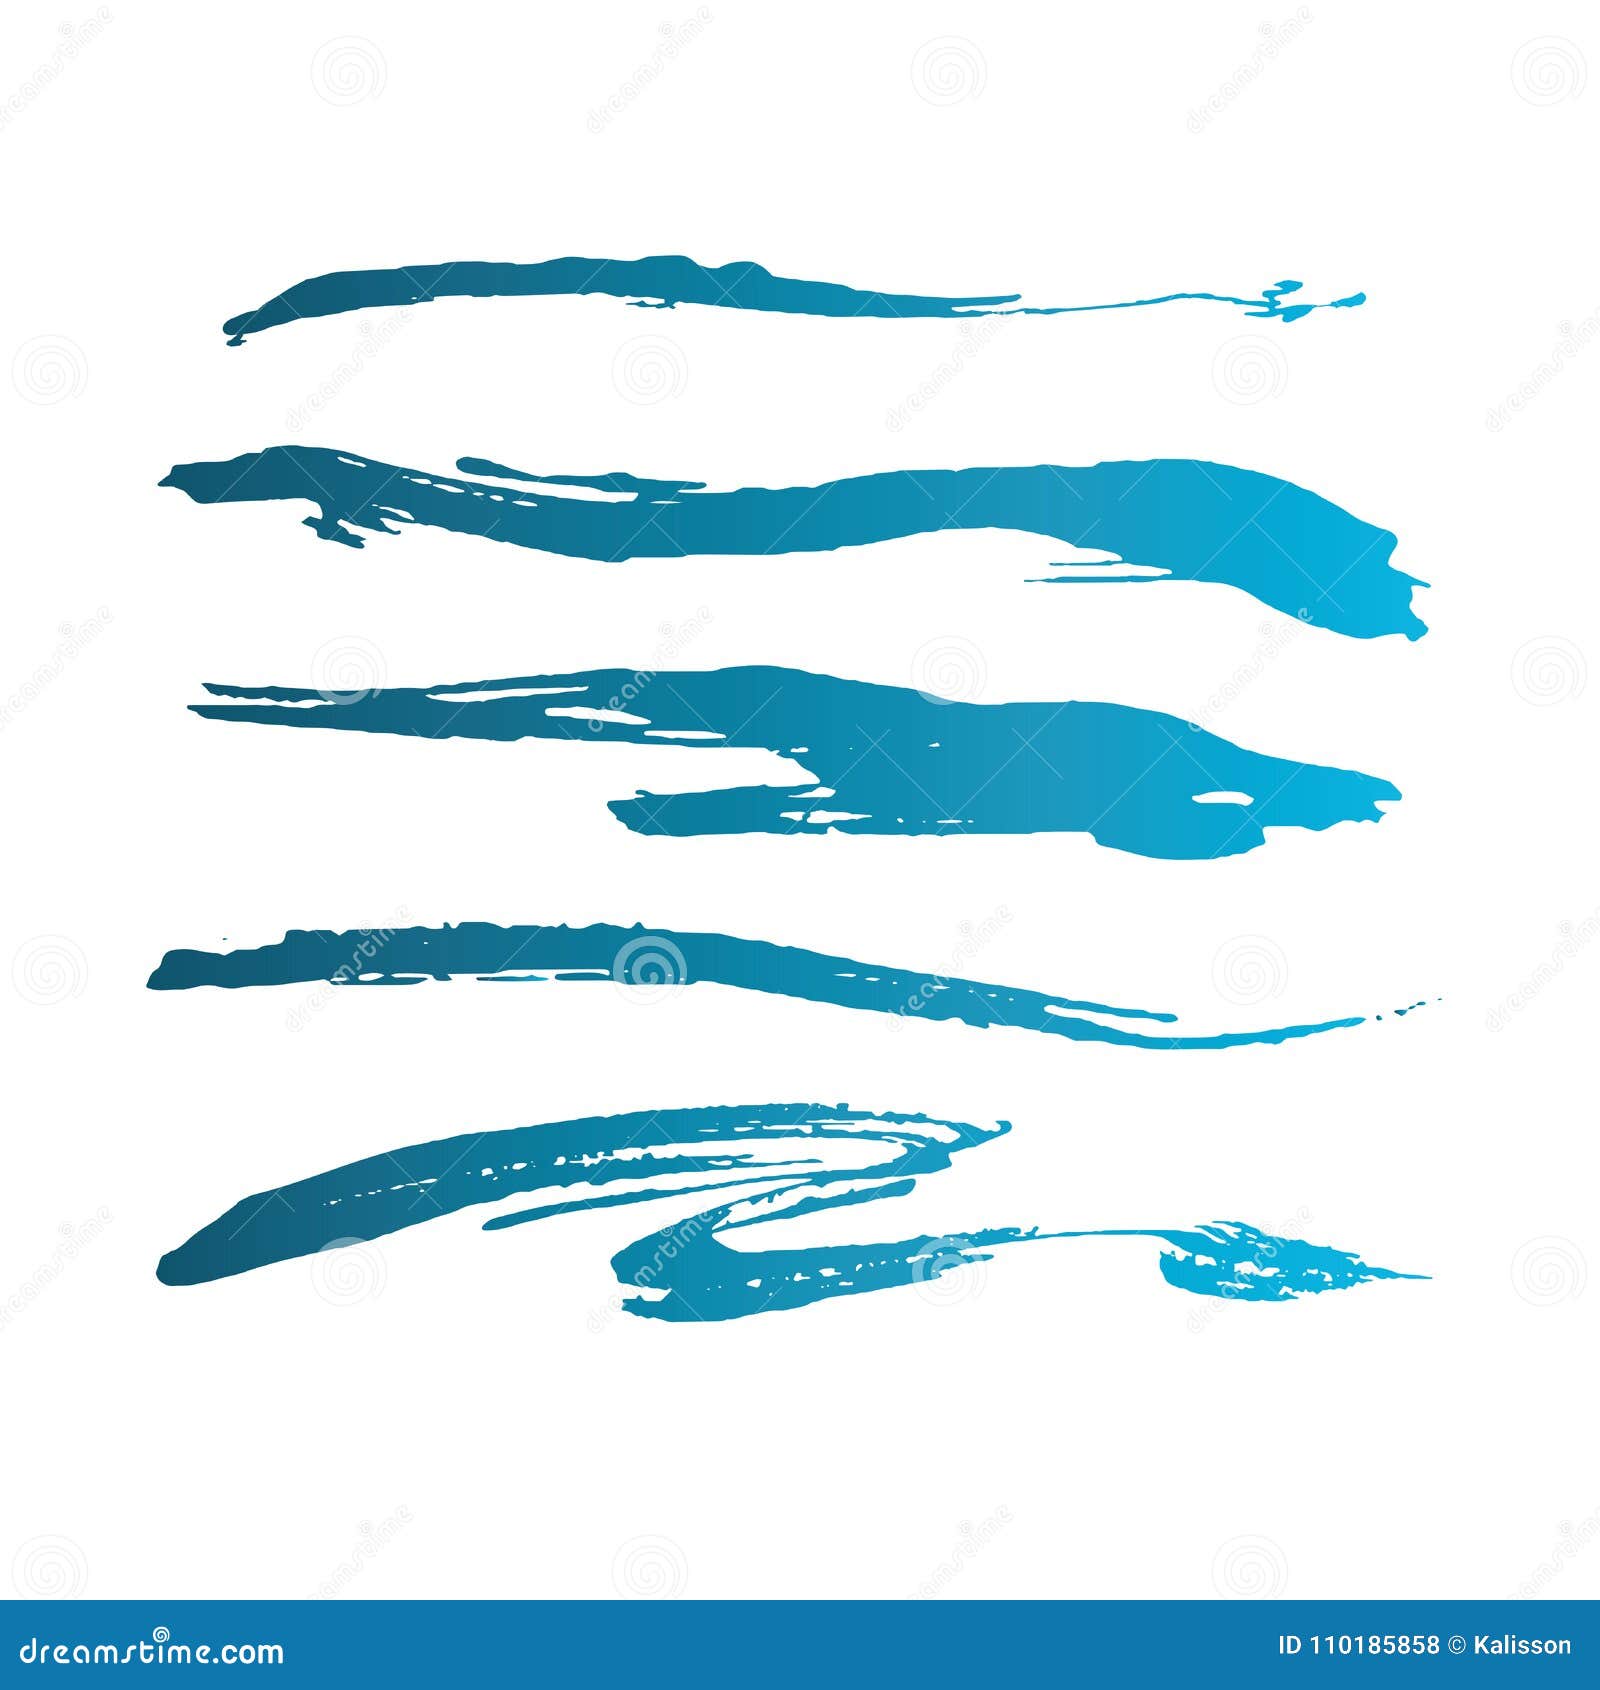 Blue abstract grunge curly brushes. Spring sea vector collection.